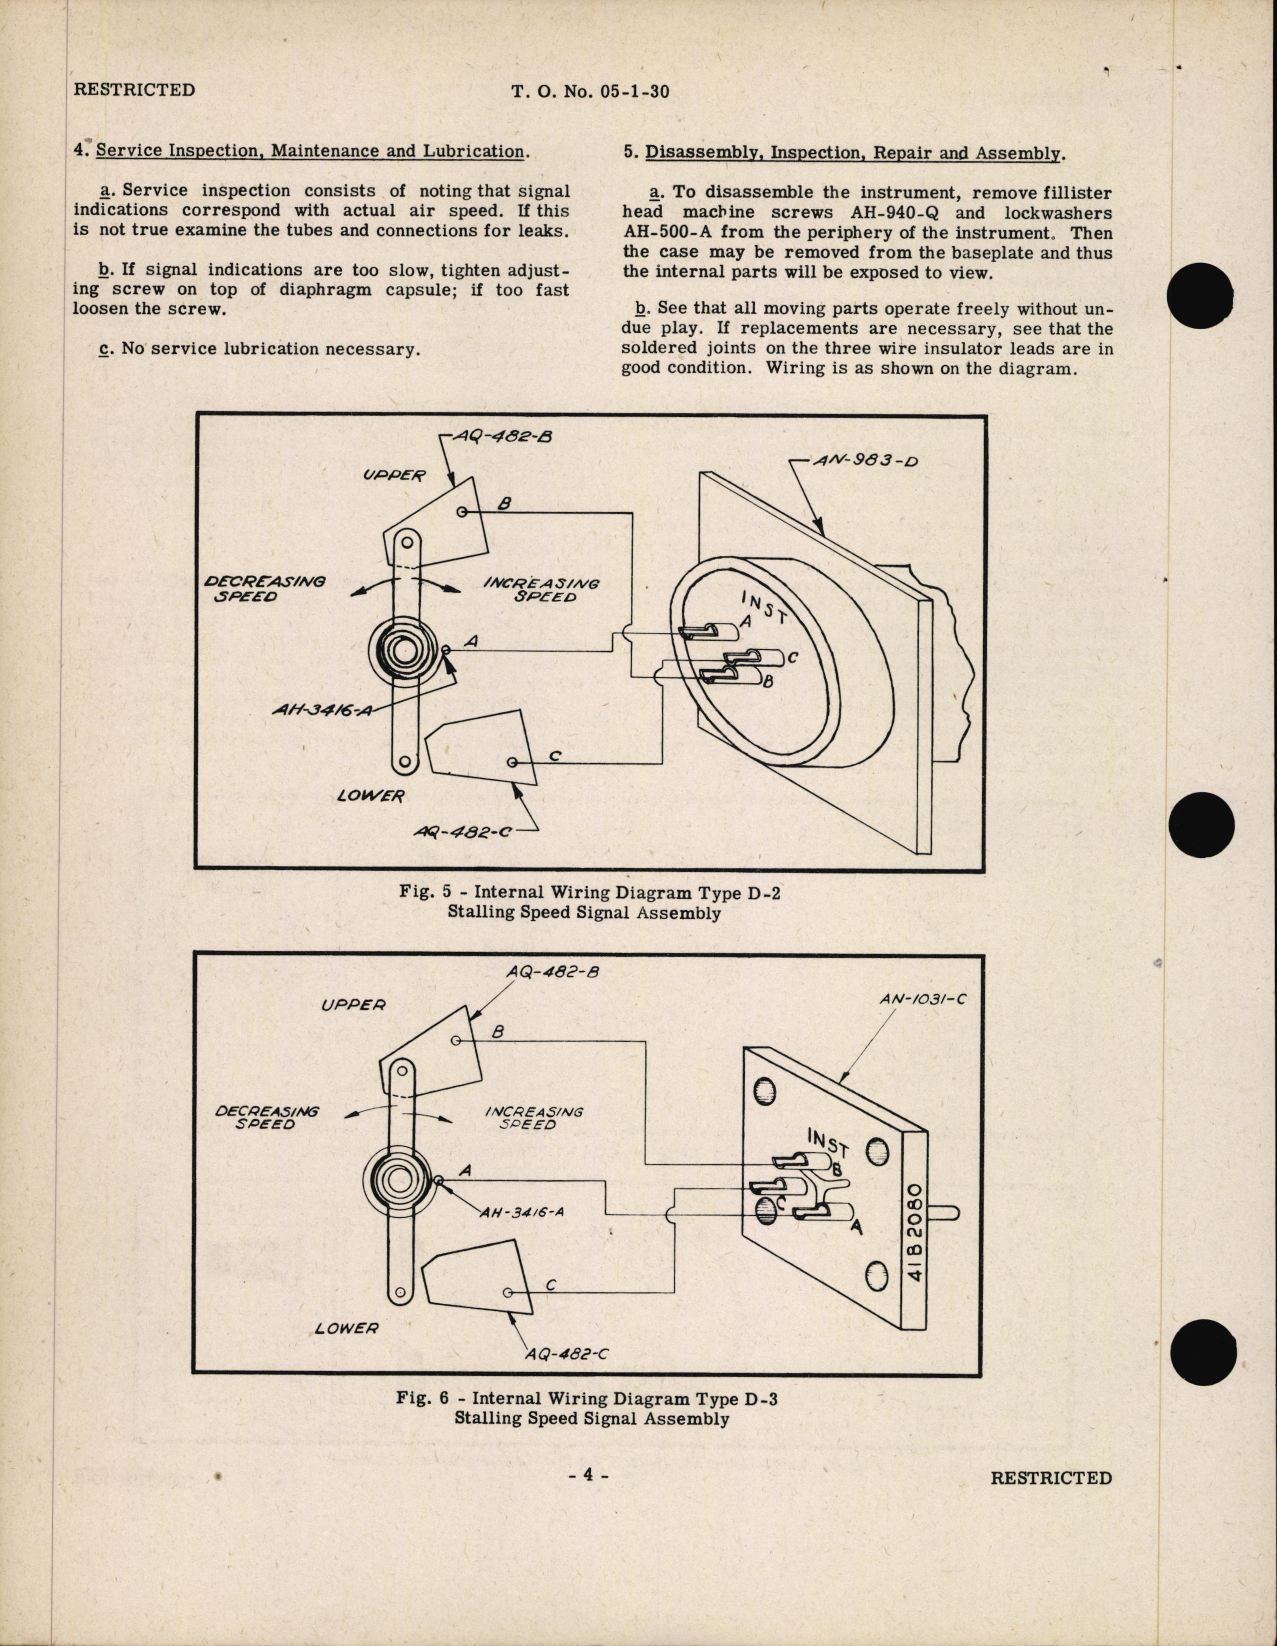 Sample page 6 from AirCorps Library document: Handbook of Instructions with Parts Catalog for Stalling Speed Signal Assembly